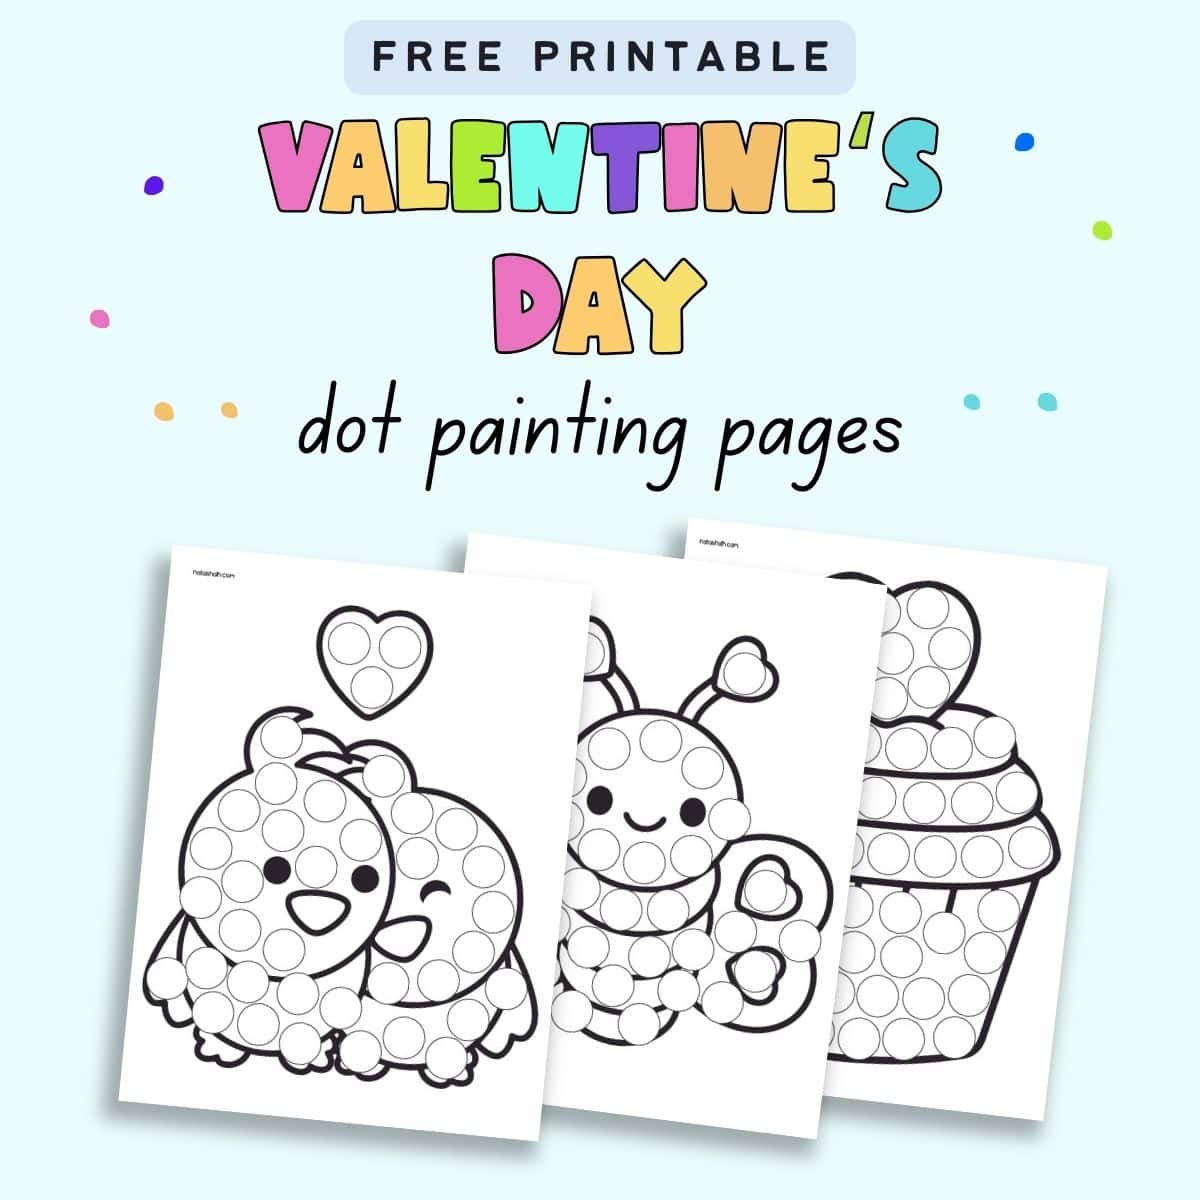 Text "free printable Valentine's Day dot painting pages" with a preview of three printable pages